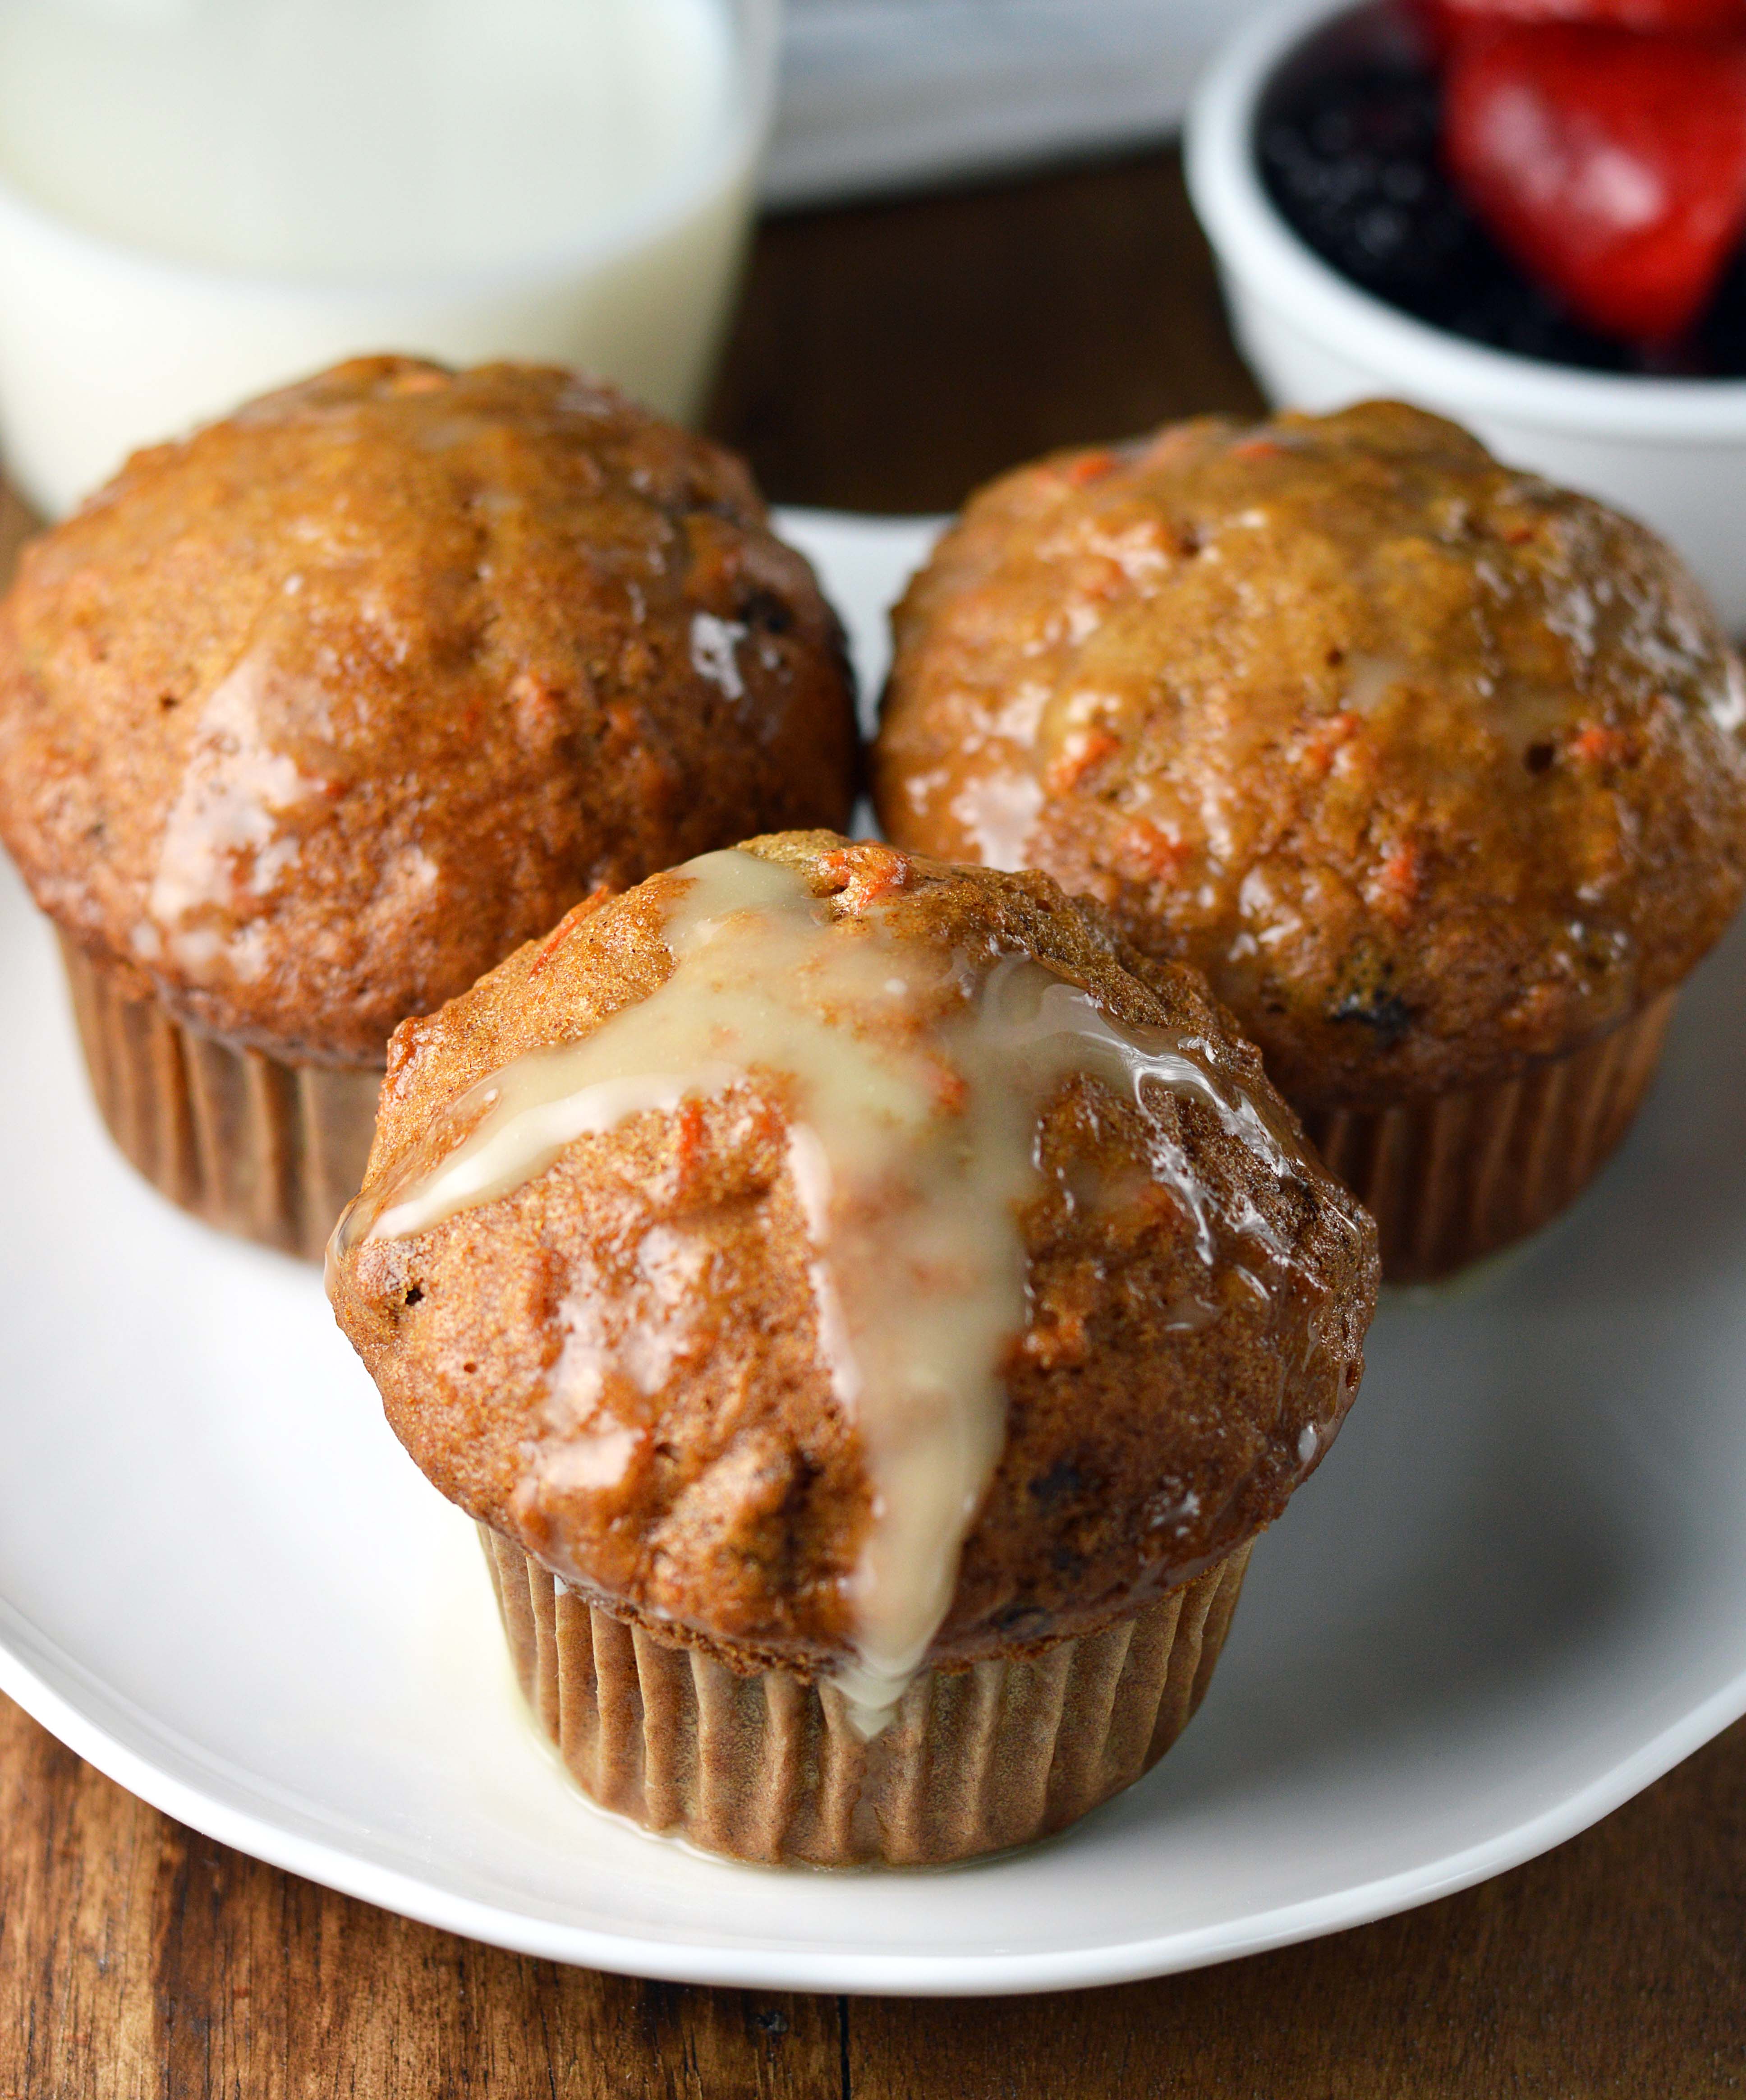 Spiced Carrot Muffins with Orange Glaze - Friday is Cake Night